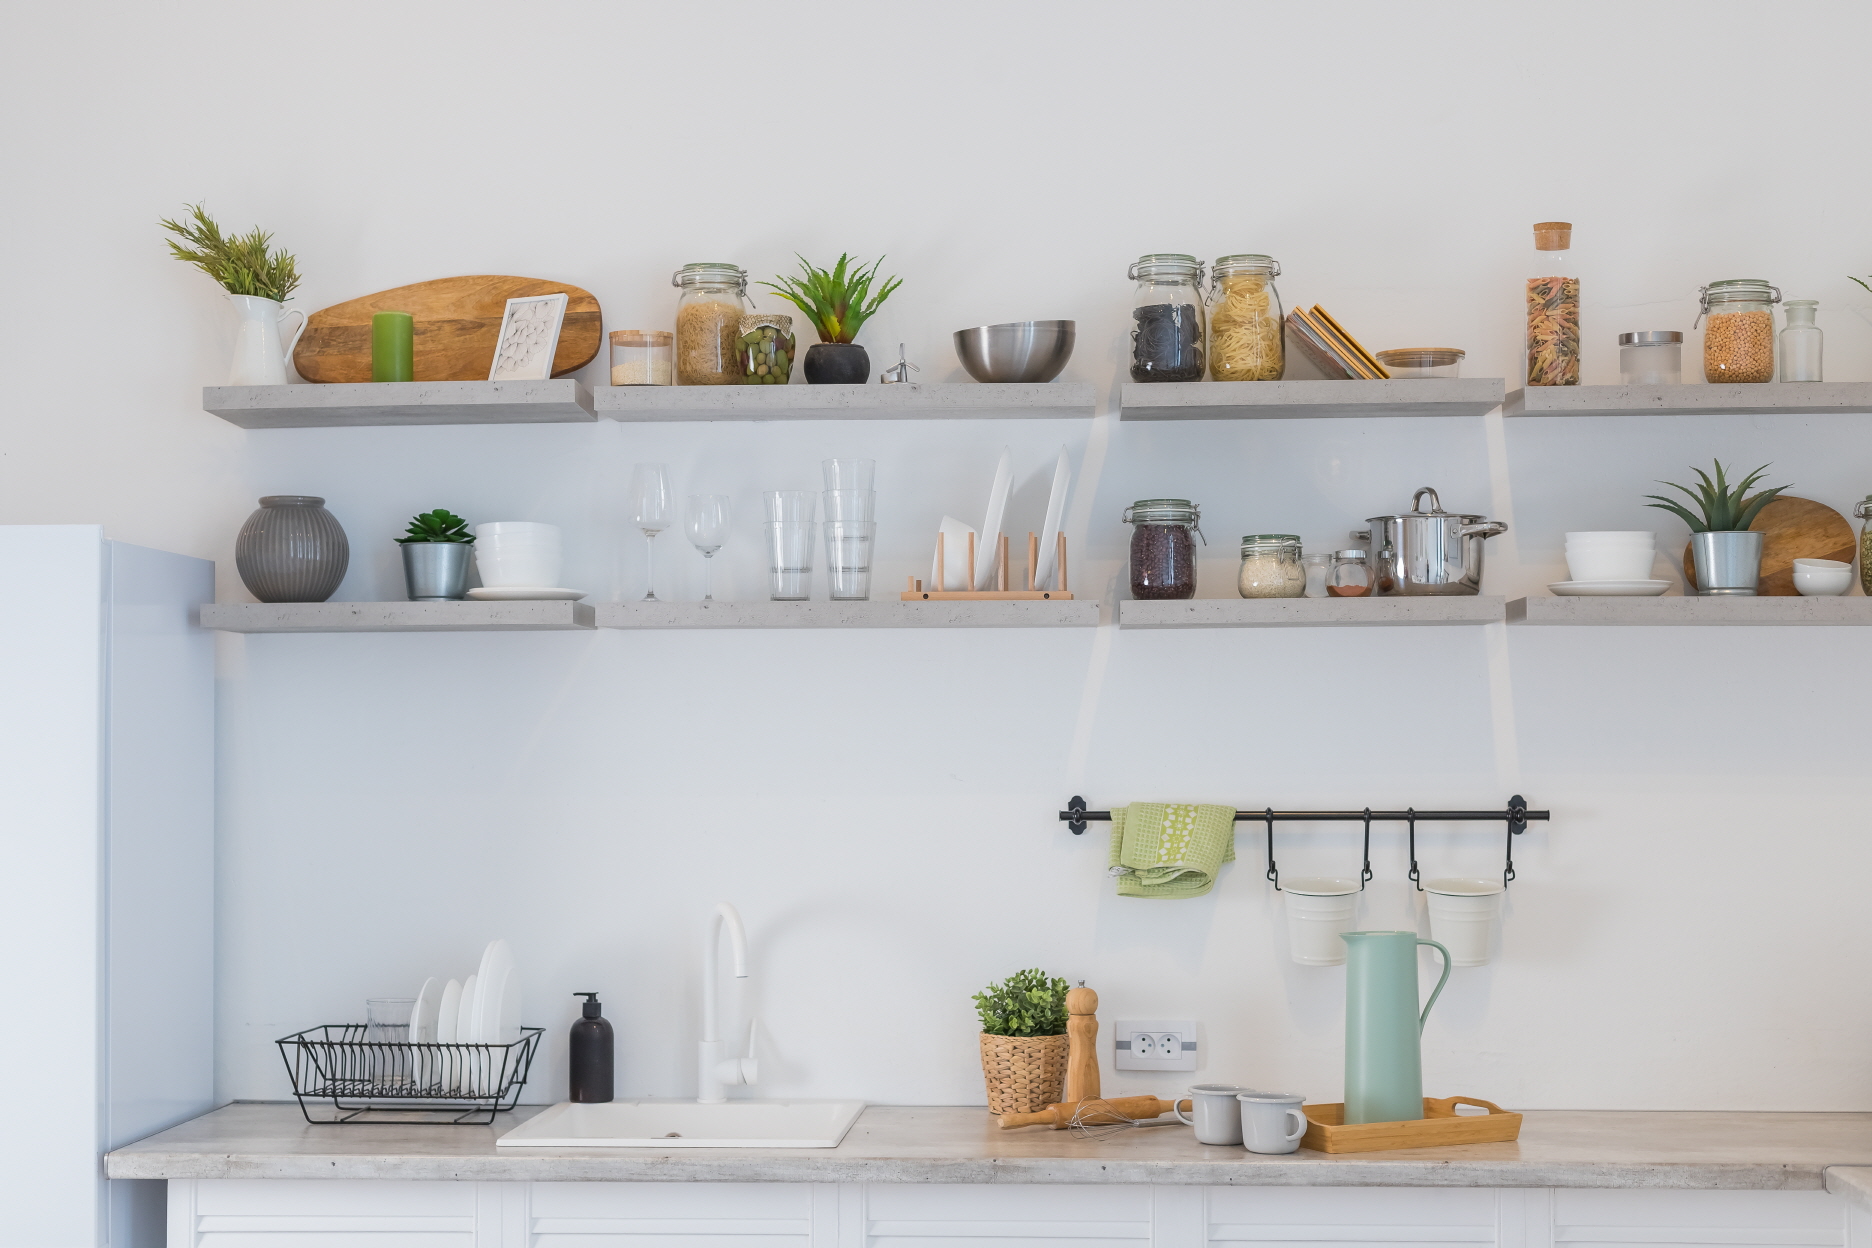 Extra shelving organizes kitchen items, maximizes space, and offers customizable storage options in various materials like wood or metal.